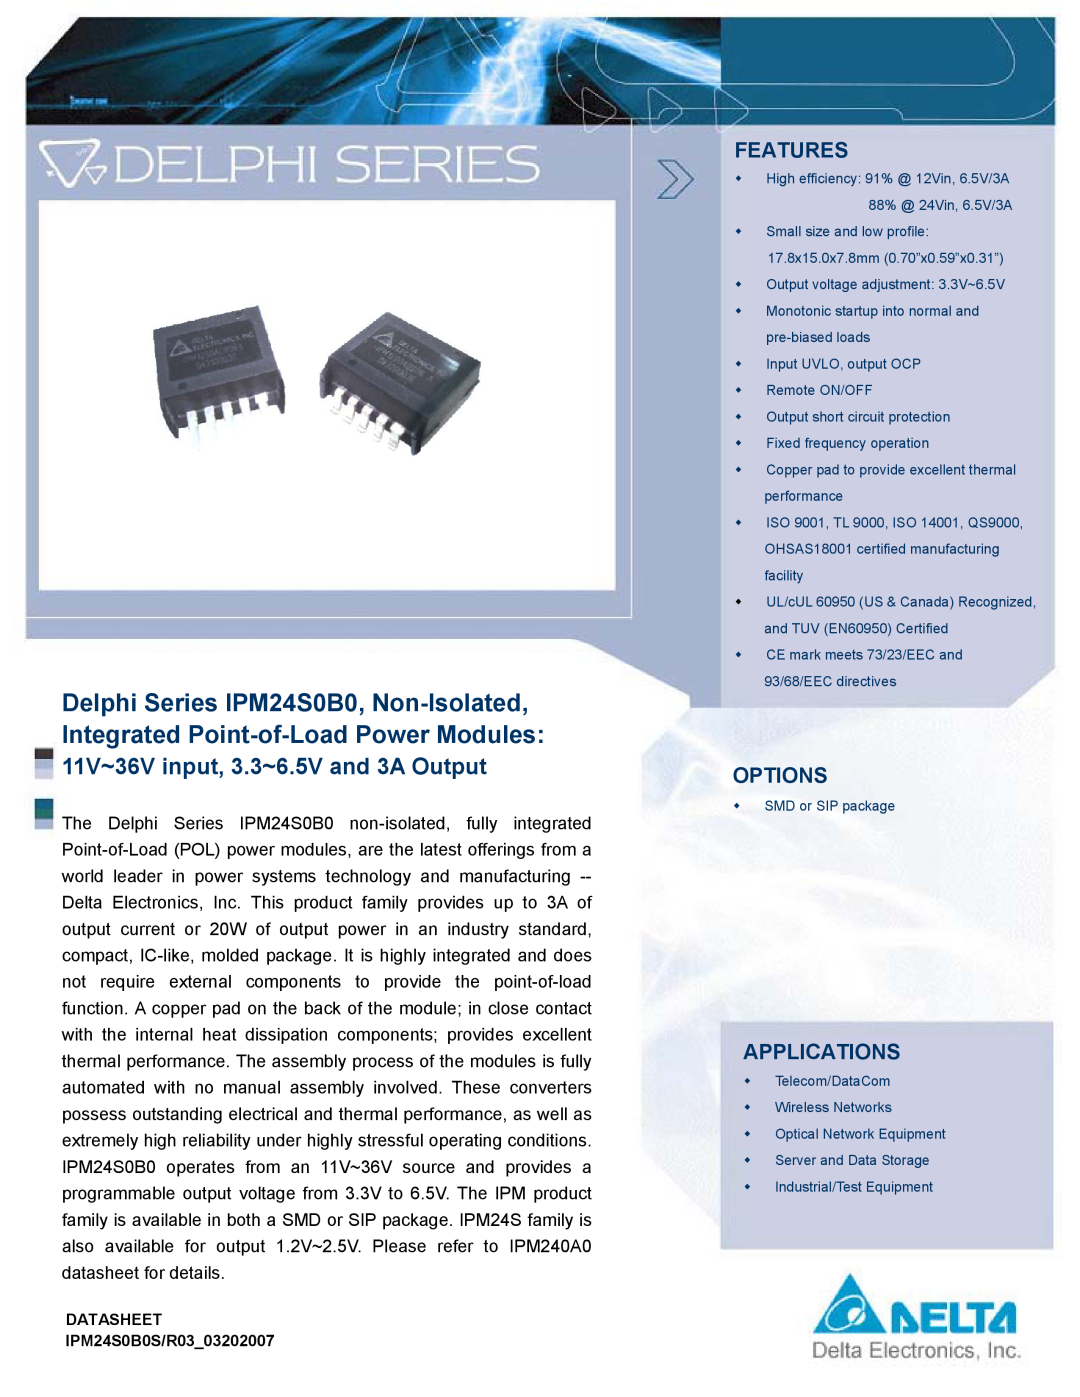 Delta Electronics IPM24S0B0 manual Features, Options, Applications, 11V~36V input, 3.3~6.5V and 3A Output 